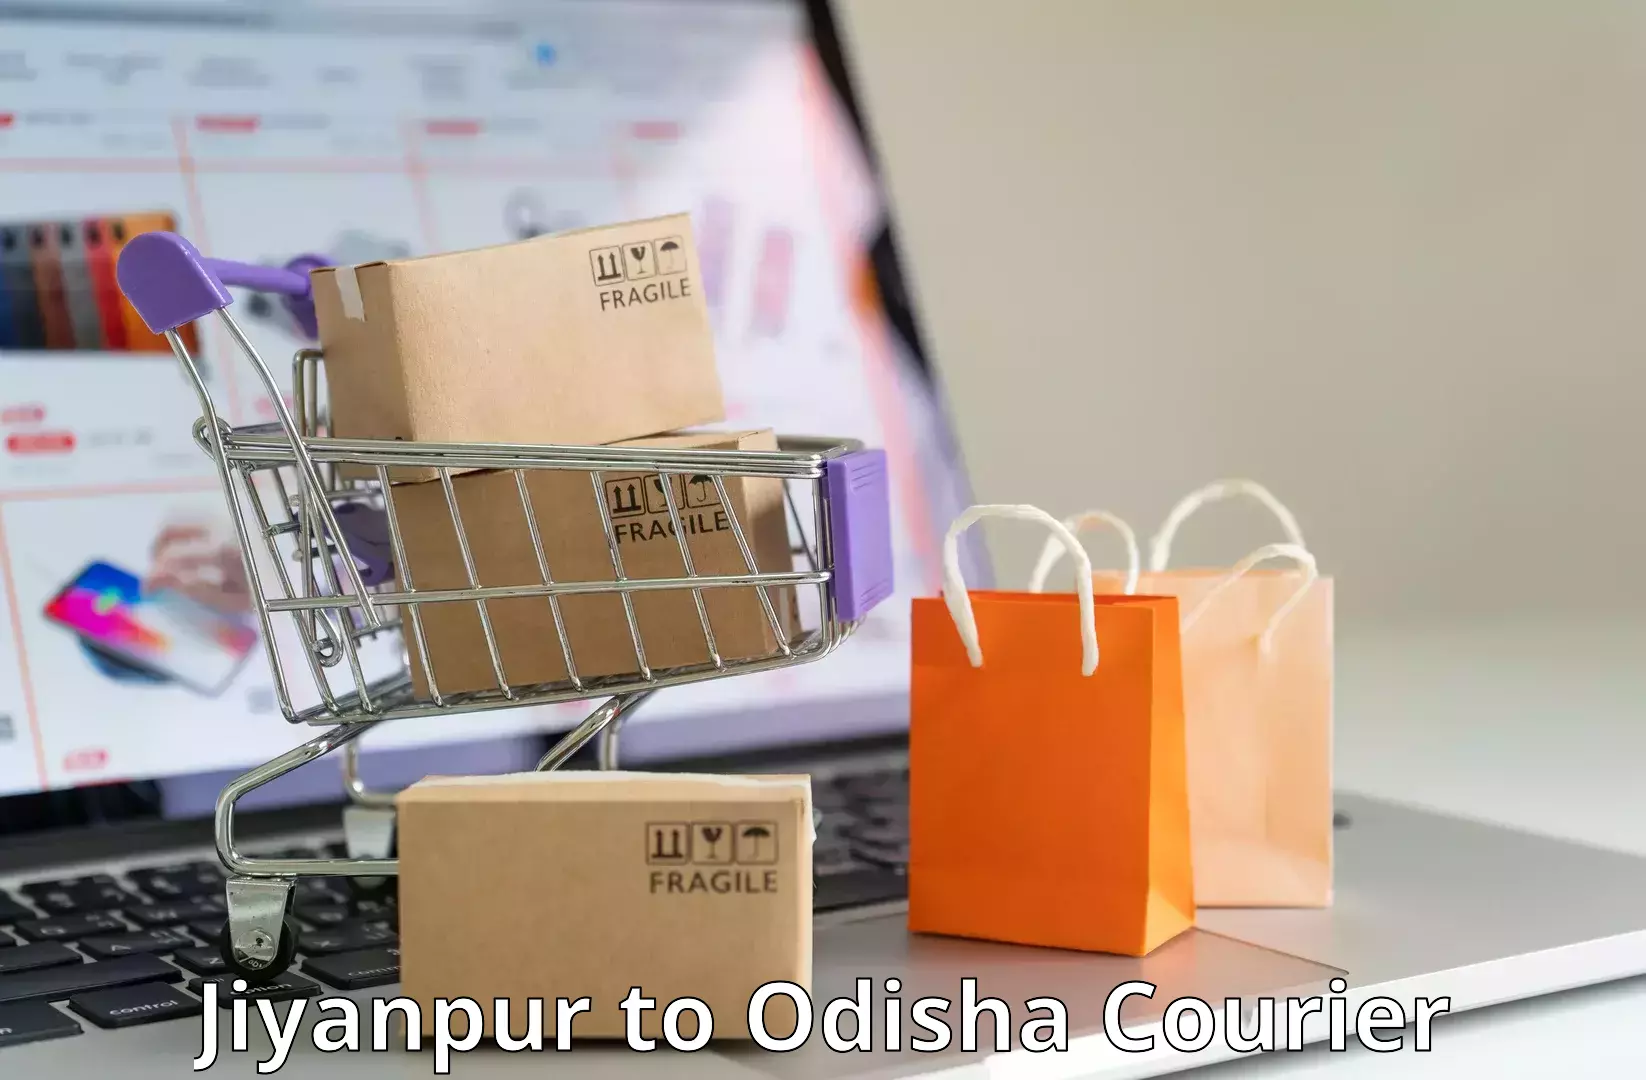 Quality courier partnerships Jiyanpur to Udala